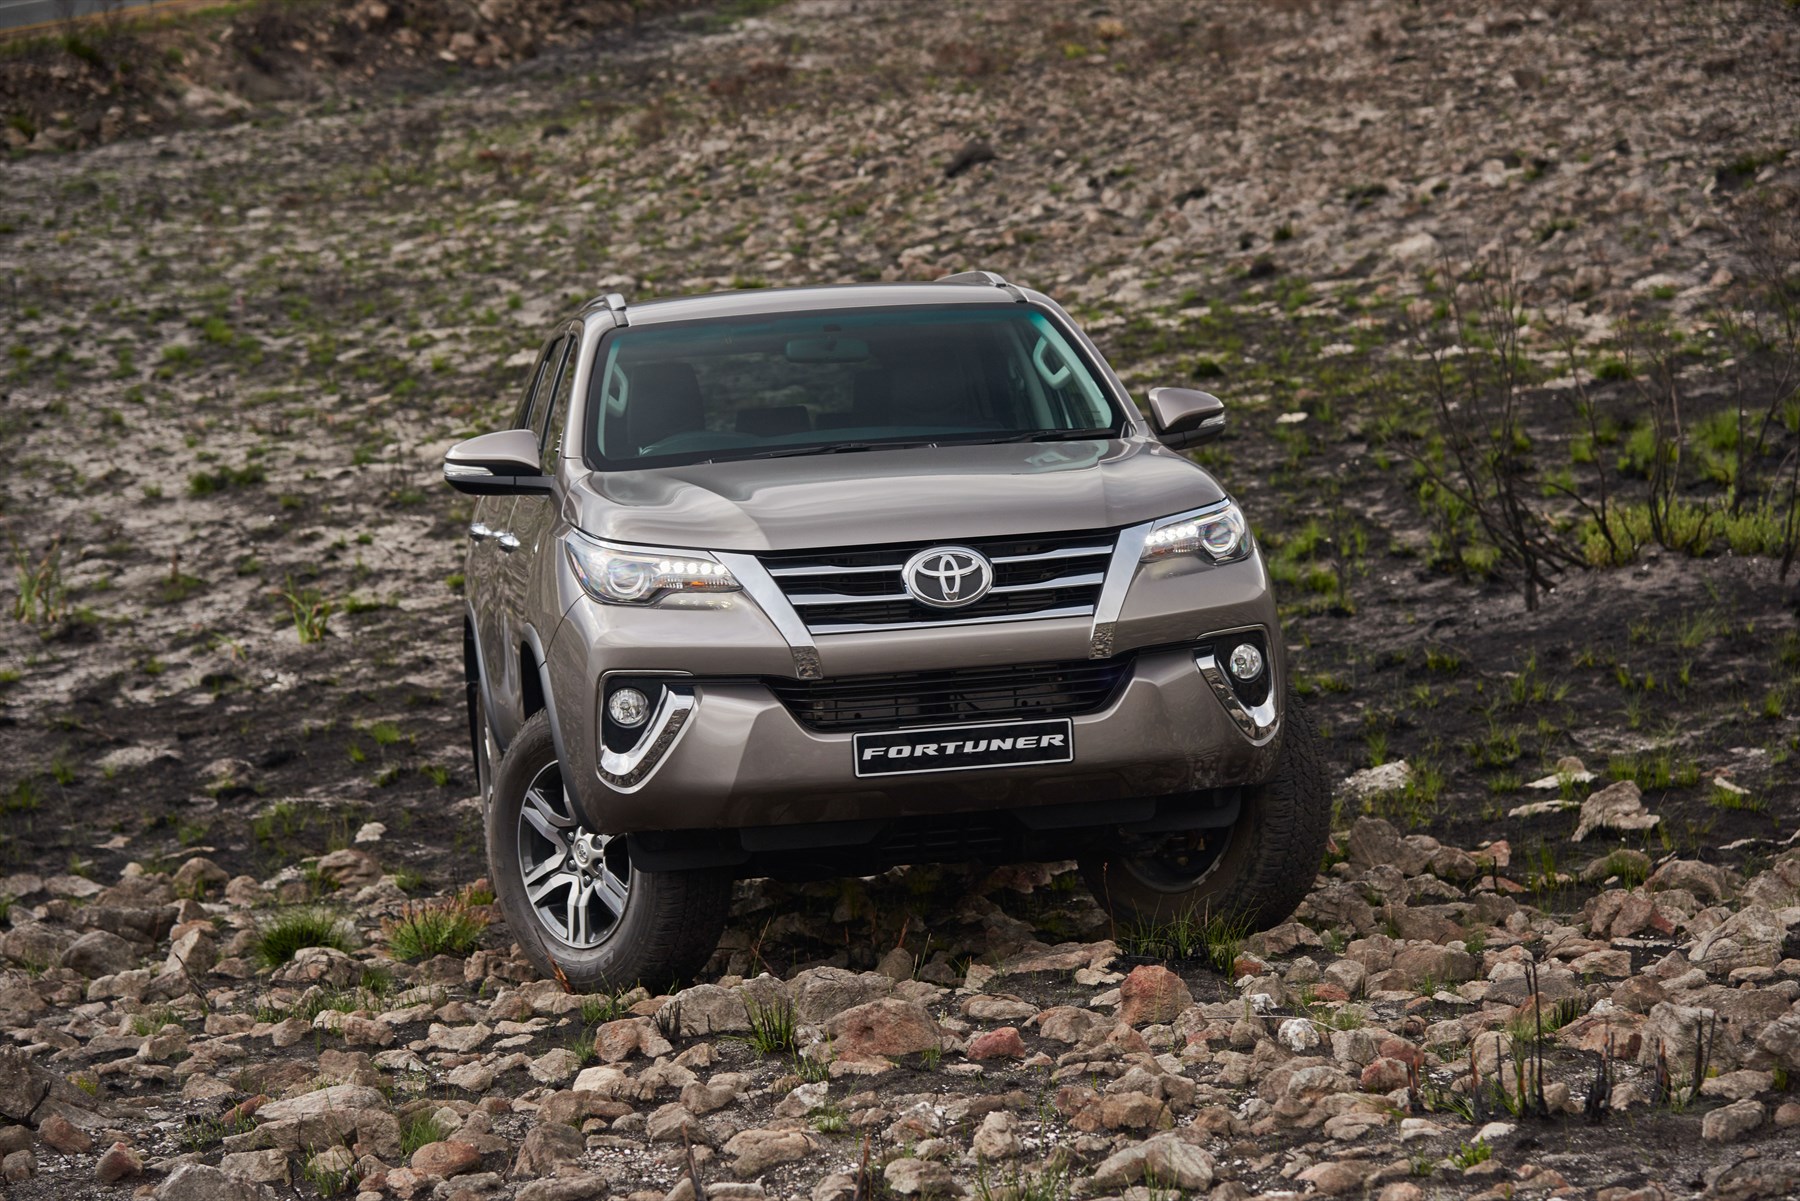 The all New Toyota Fortuner. It's waiting for action!